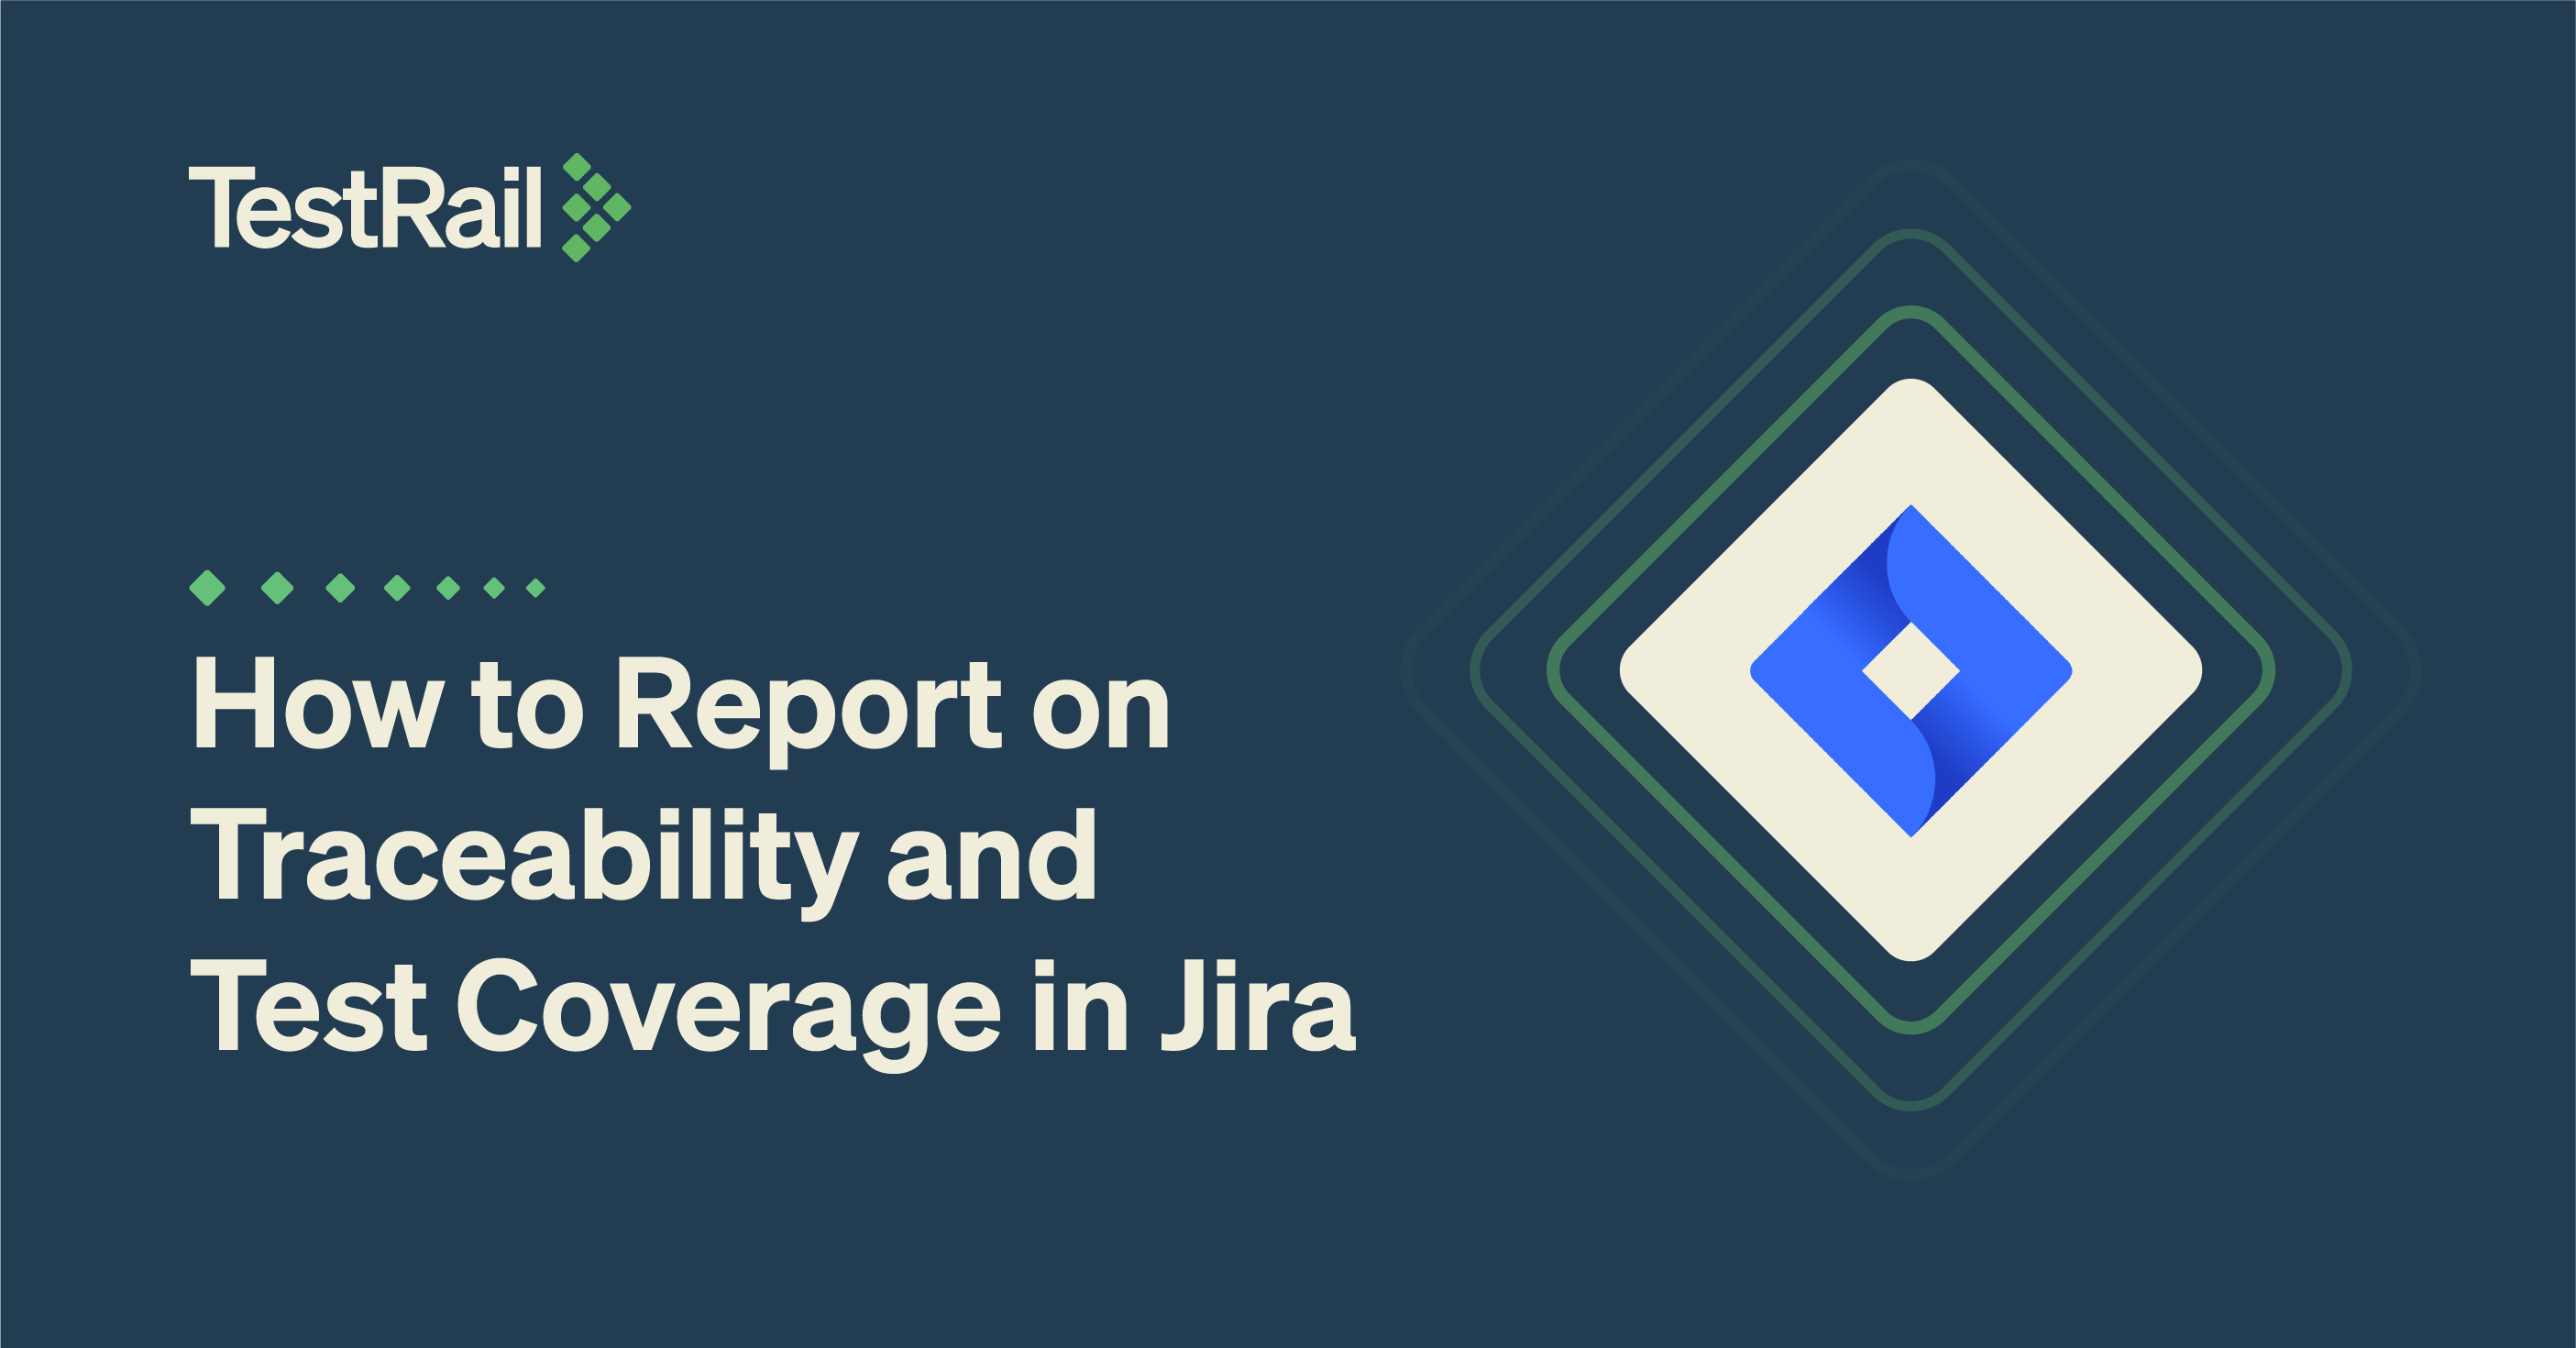 How to Report on Traceability and Test Coverage in Jira